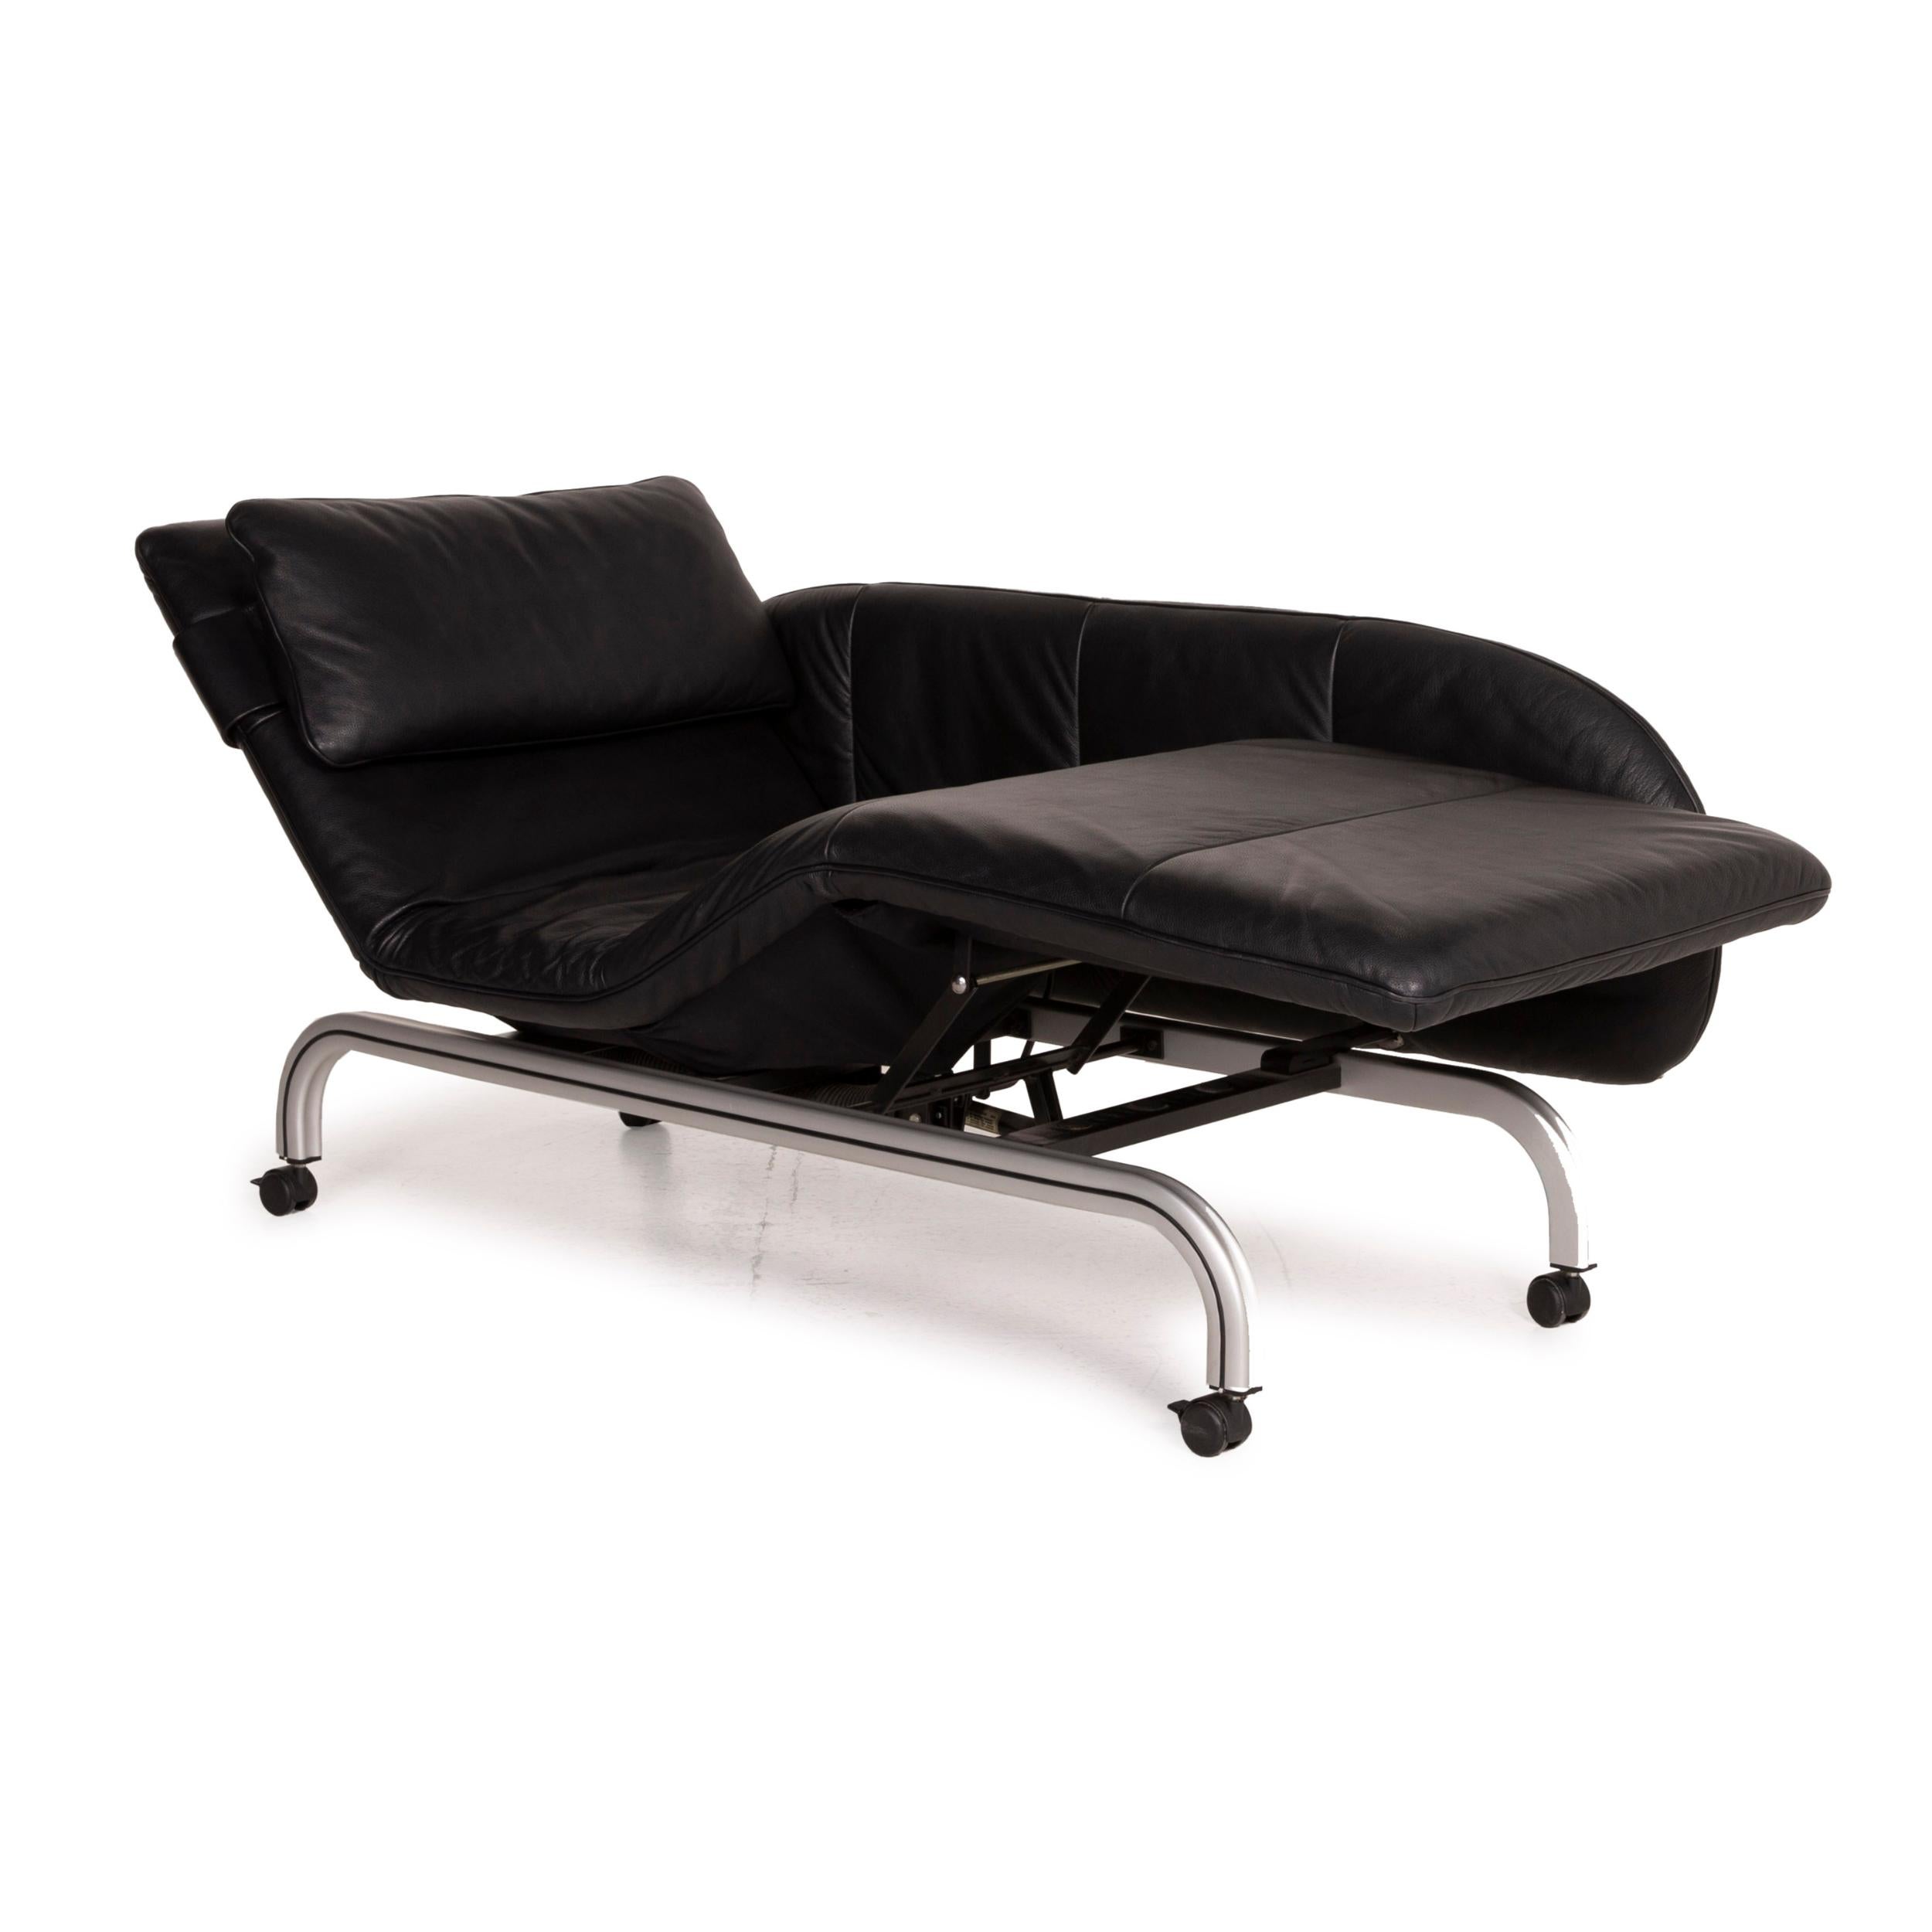 Modern Interprofil Beo Leather Lounger Black Function Two-Seater